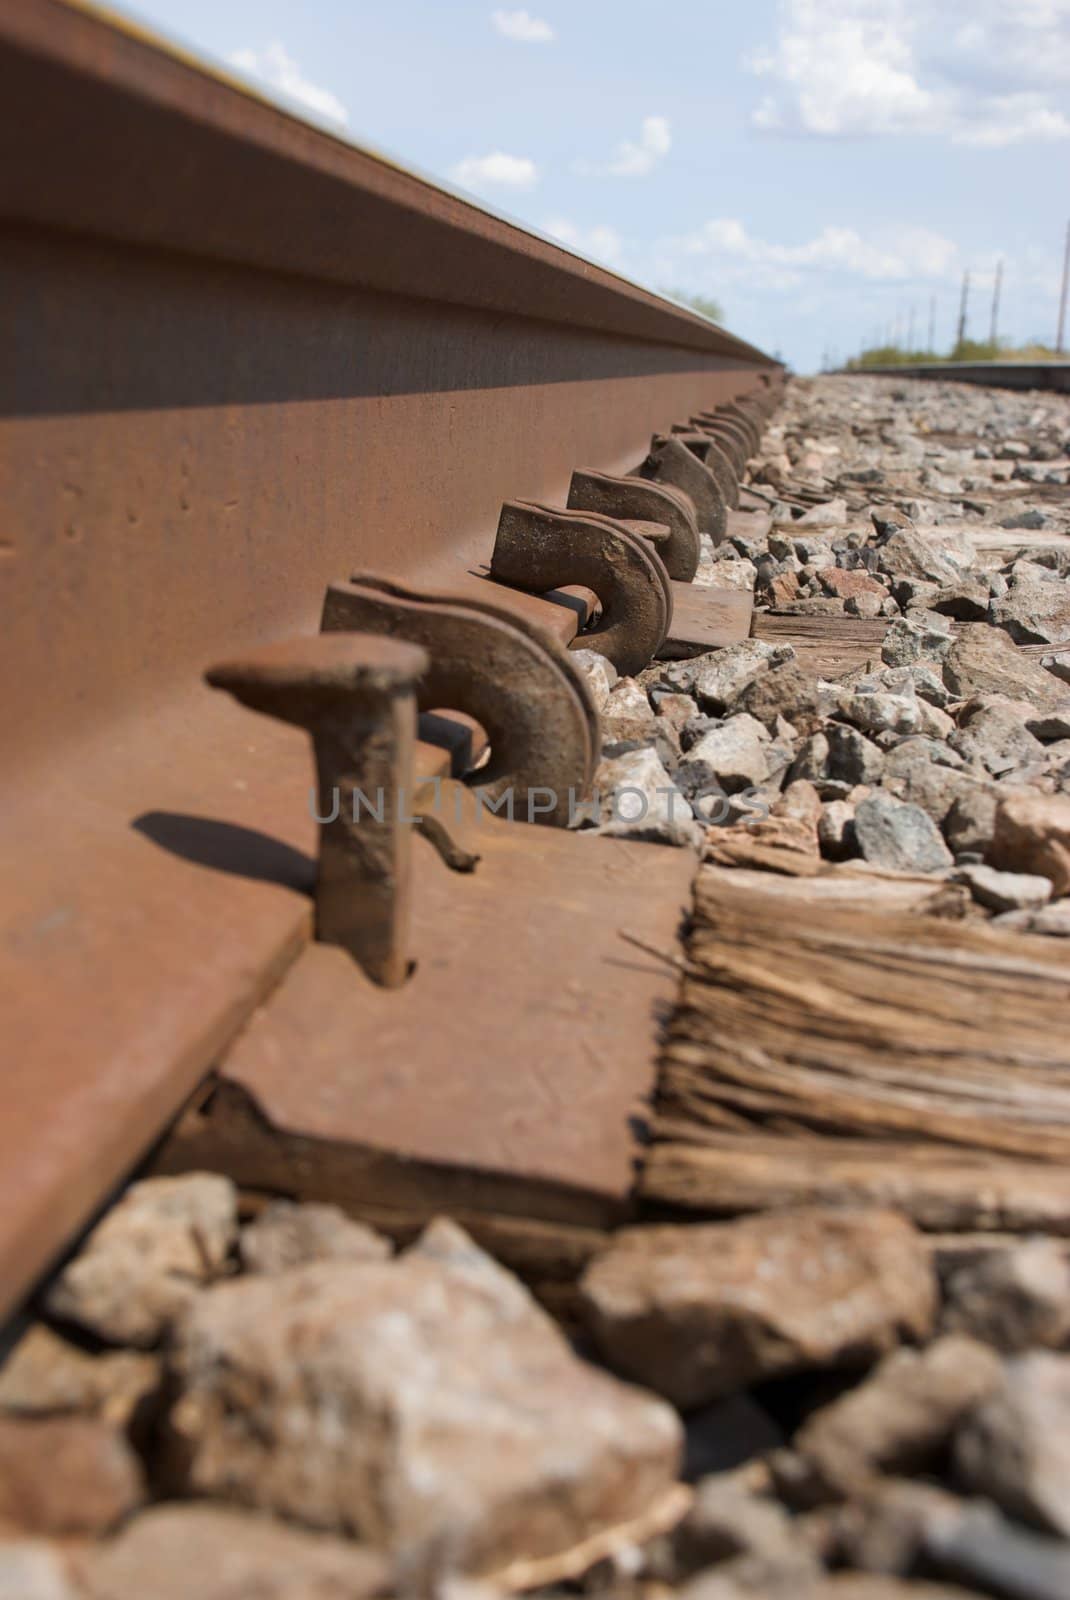 Rusted Train Tracks by pixelsnap